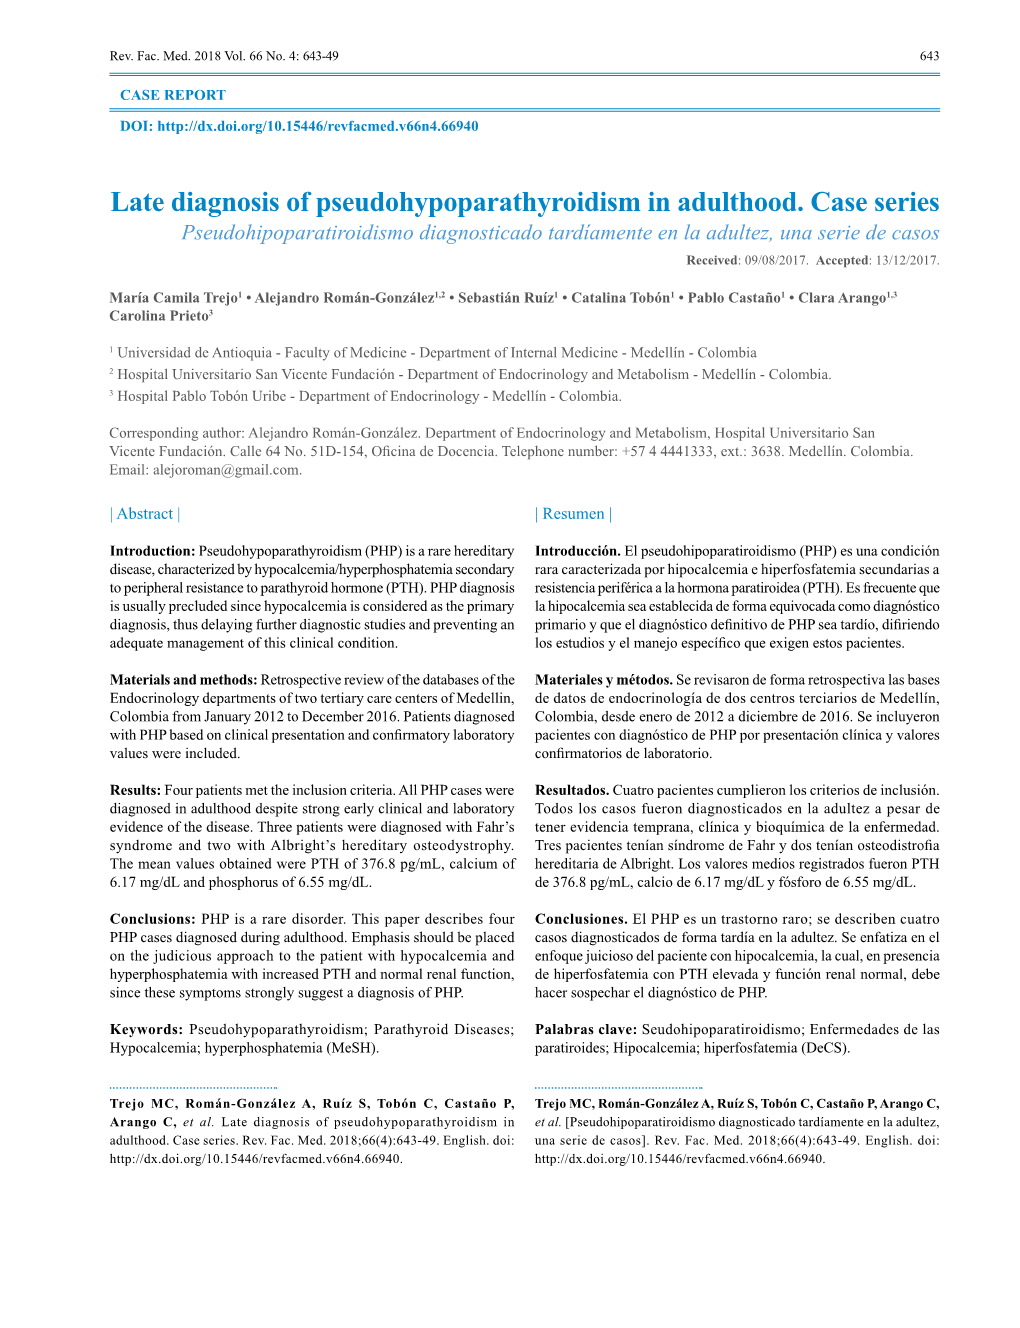 Late Diagnosis of Pseudohypoparathyroidism in Adulthood